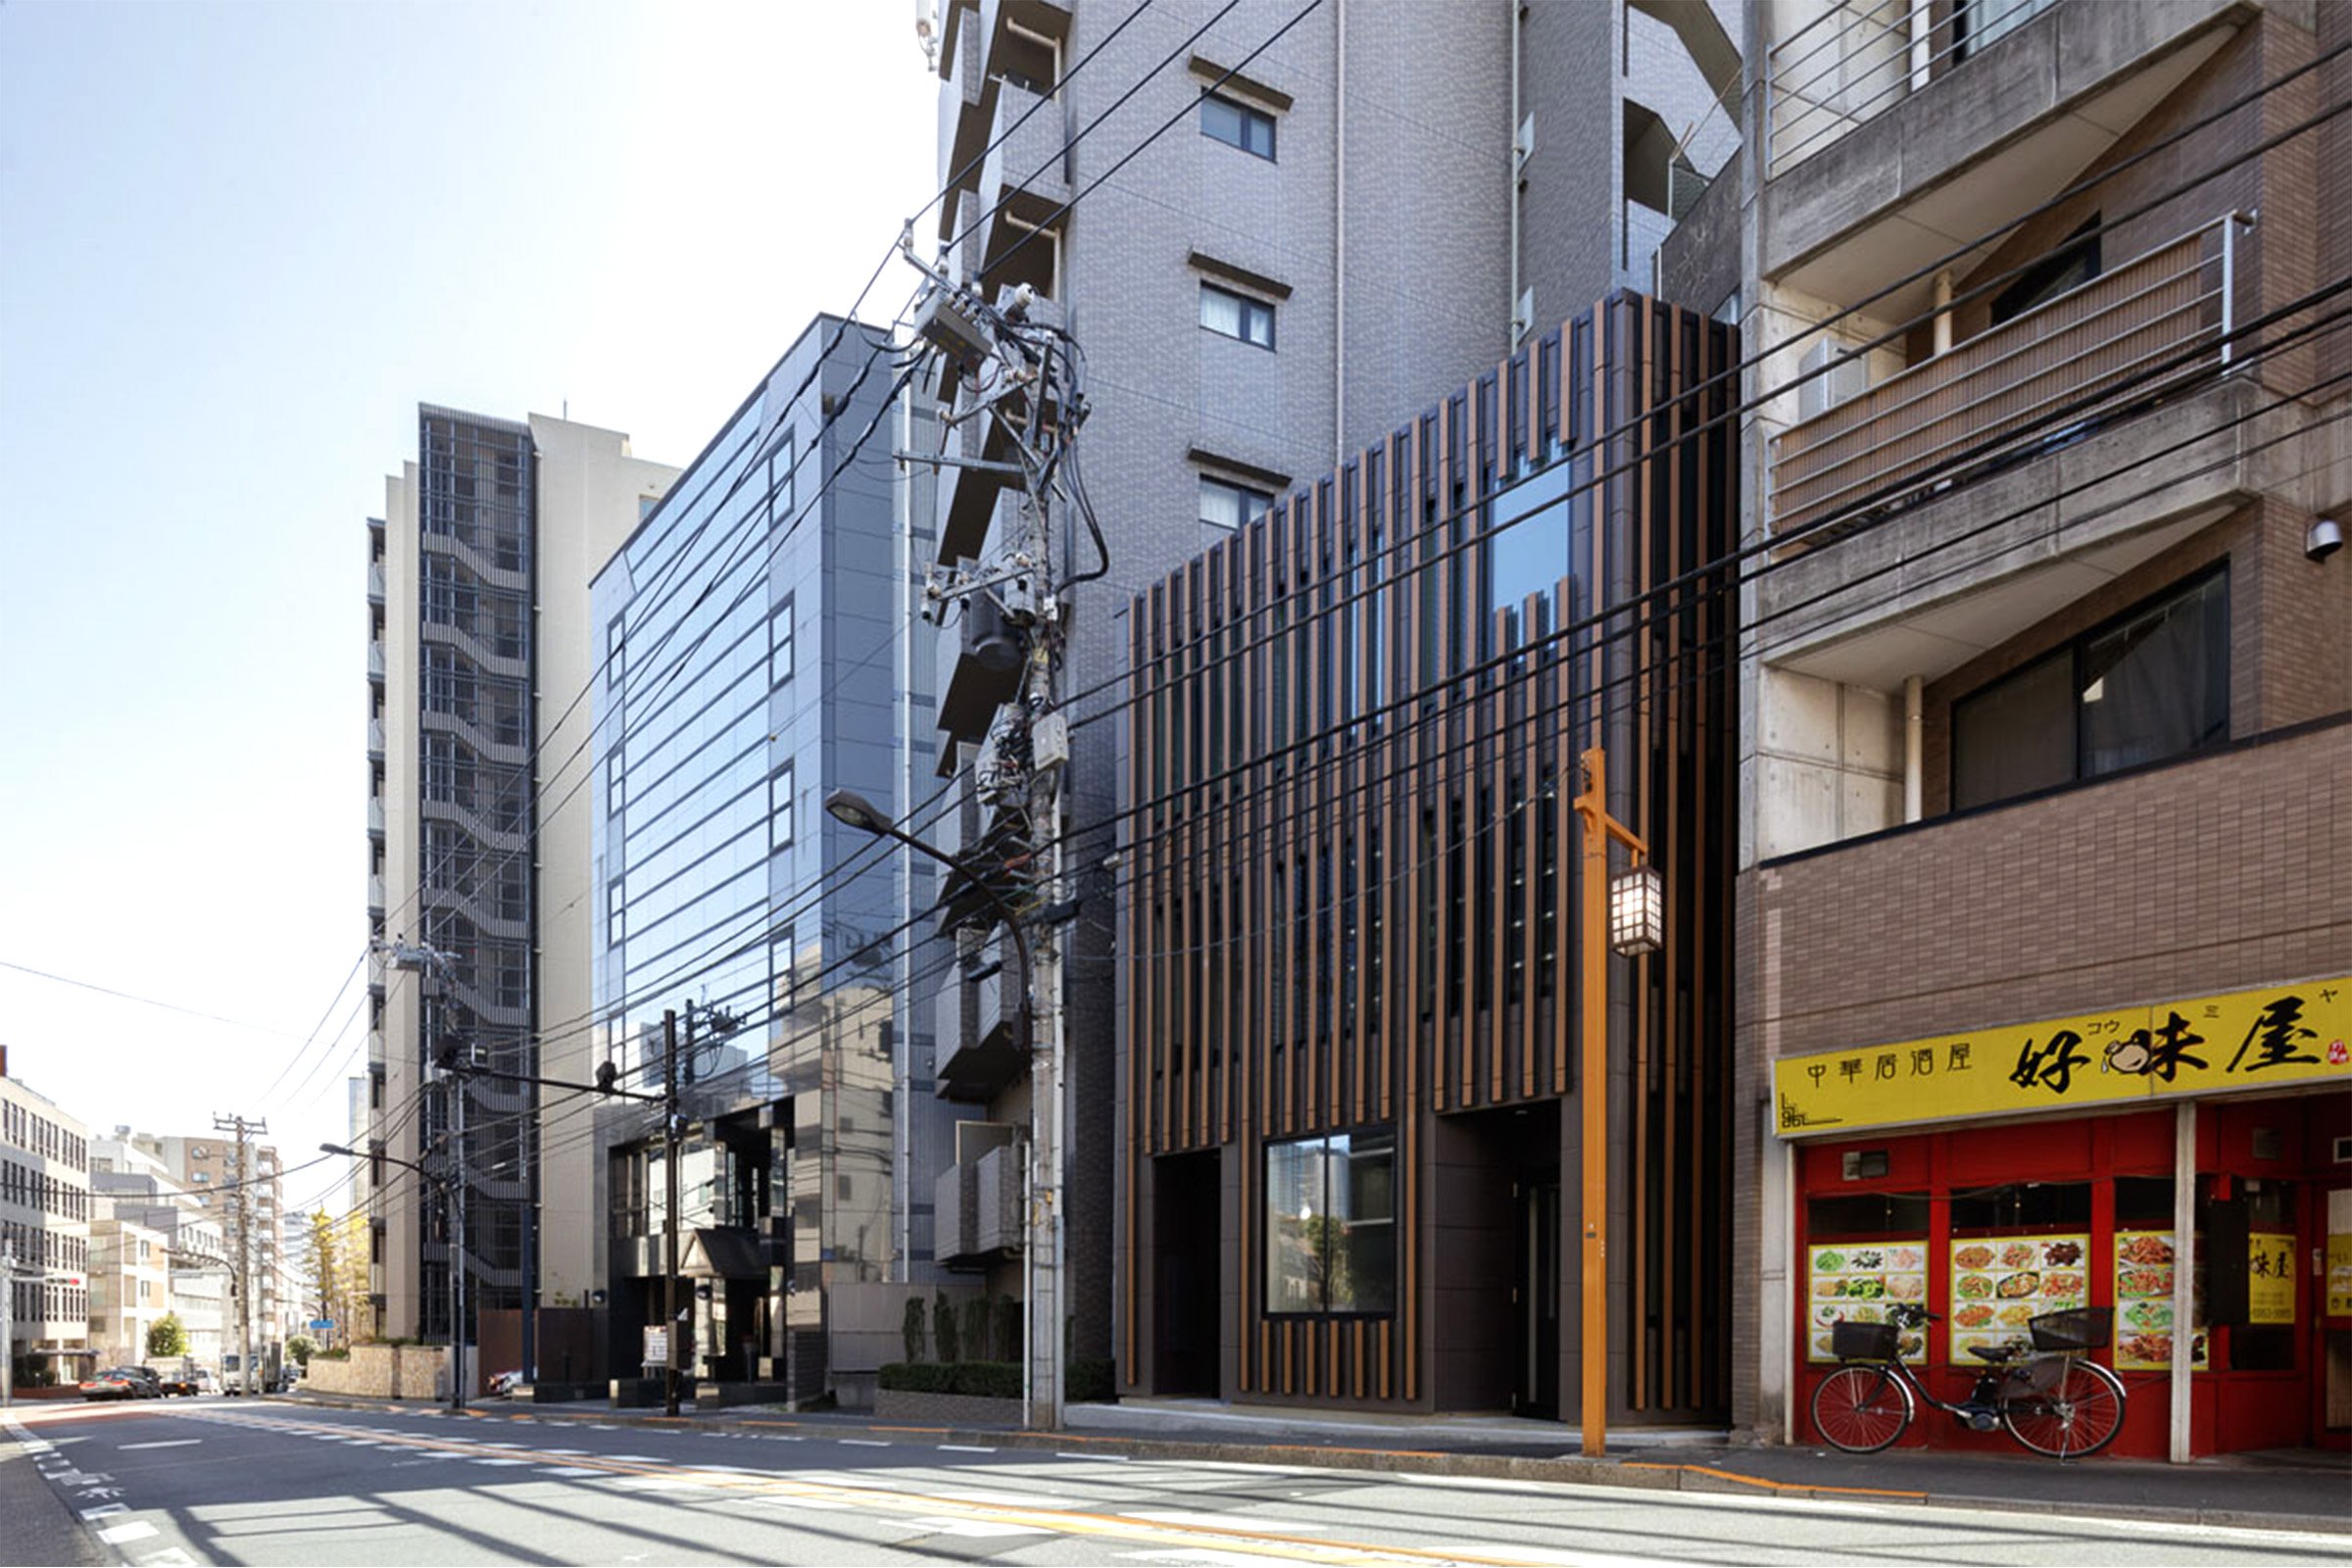 Victoria1842 3 Storey Cafe Commercial Building Shinjuku Tokyo Timber Structure 01.jpg